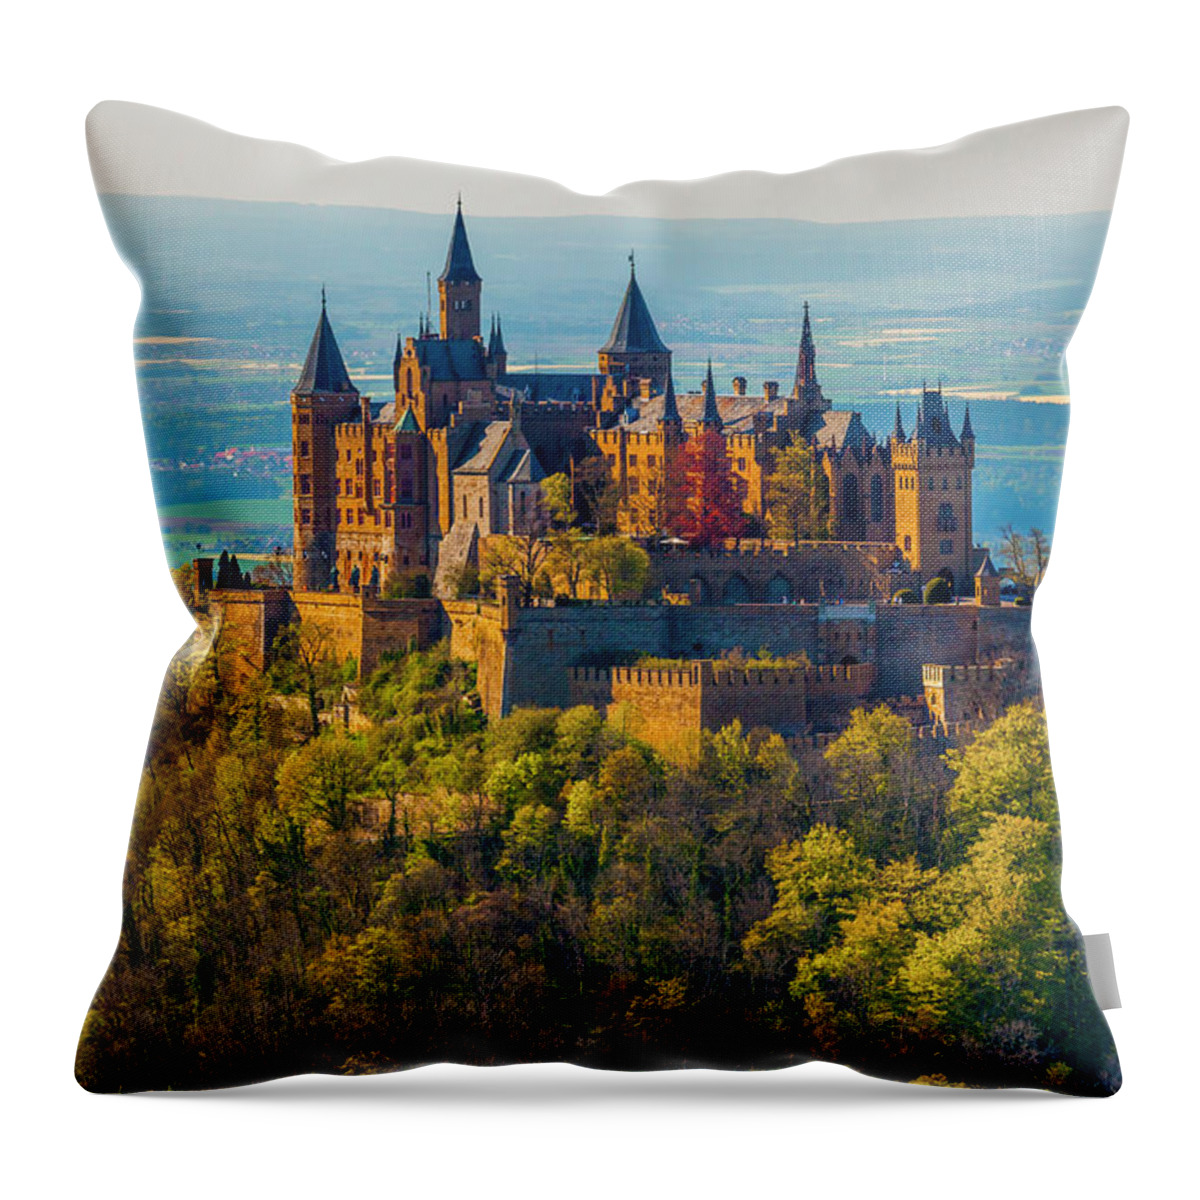 Estock Throw Pillow featuring the digital art Hohenzollern Castle In Germany #3 by Olimpio Fantuz